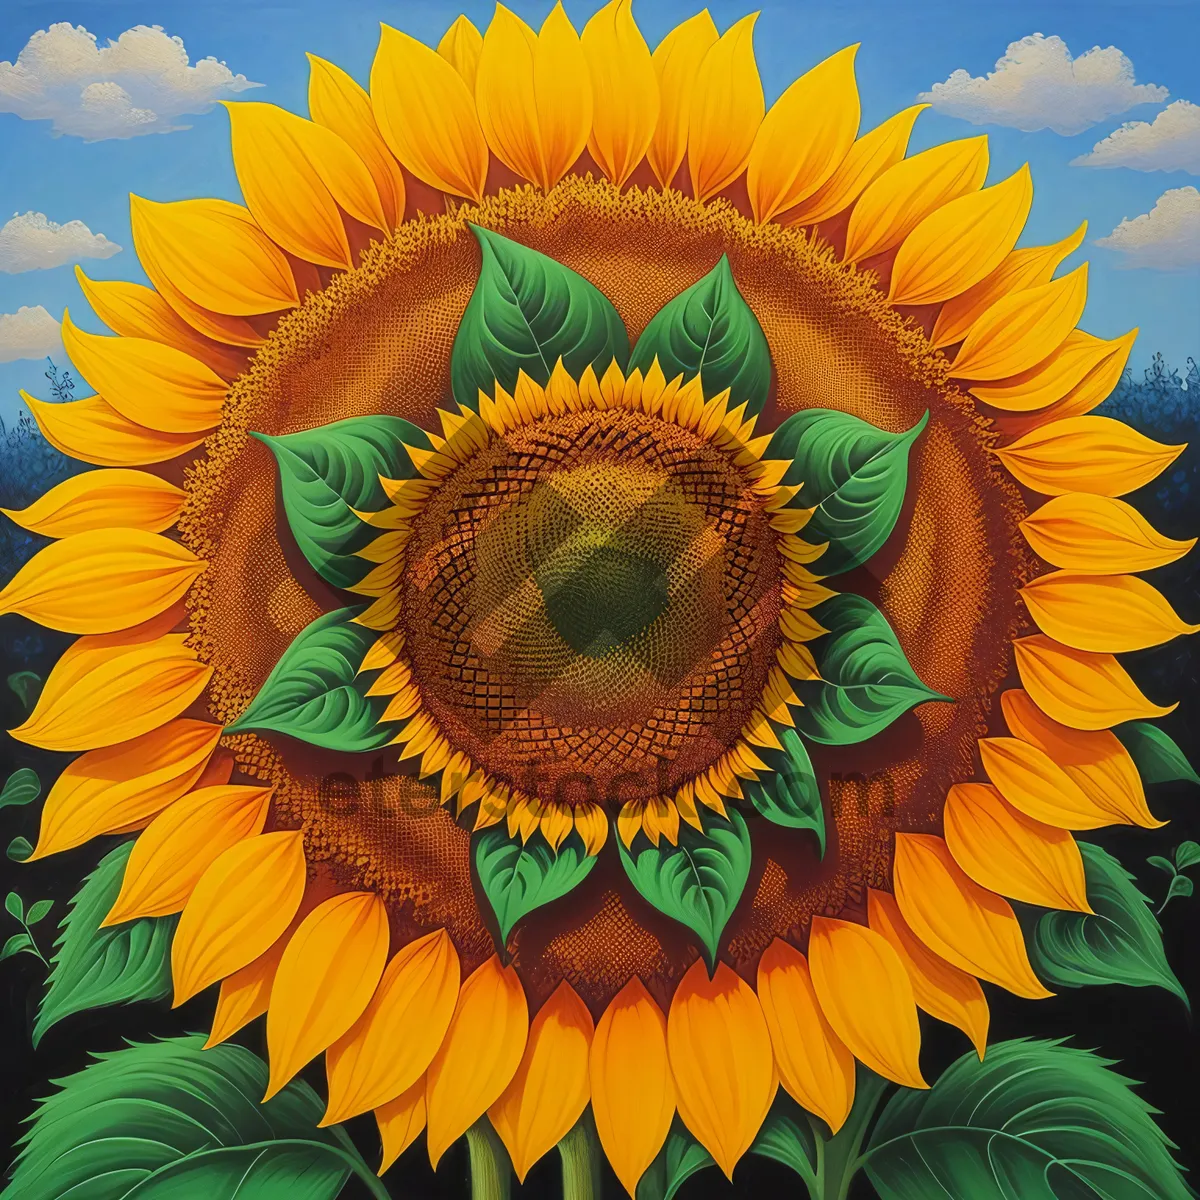 Picture of Radiant Sunflower Blooming in Vibrant Yellow Field.